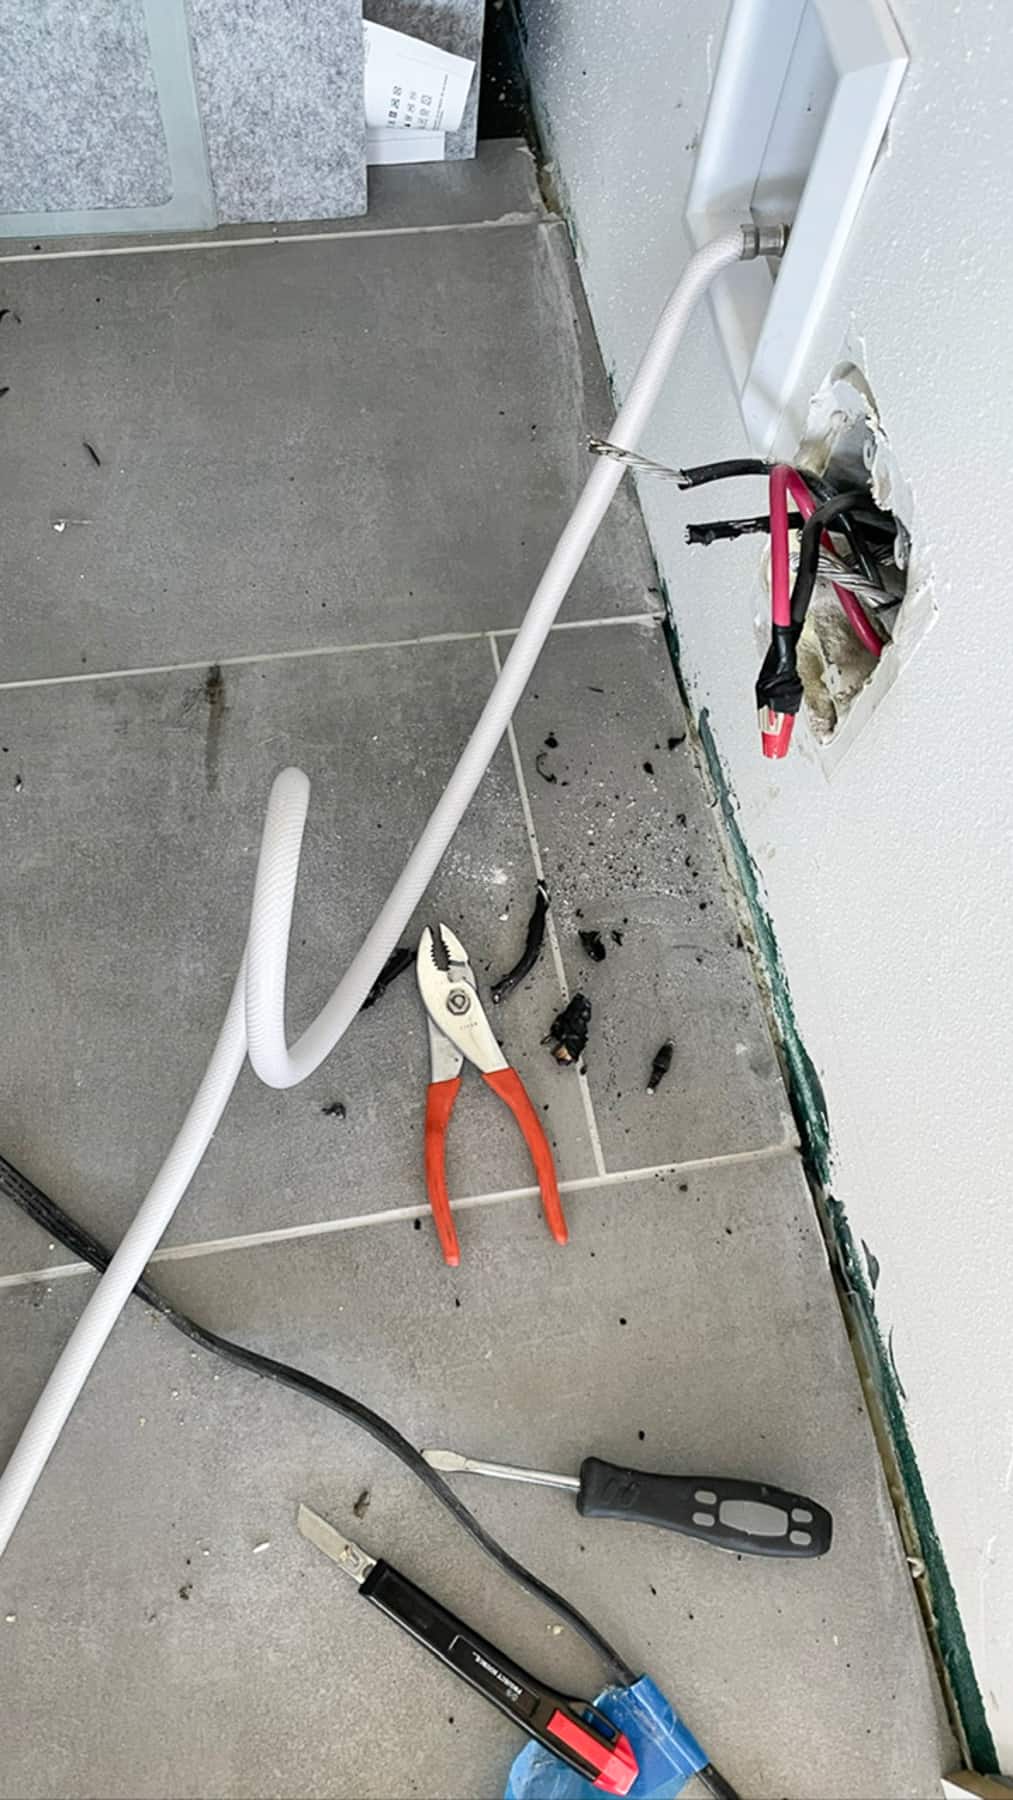 tools and singed cords on a grey tile floor.